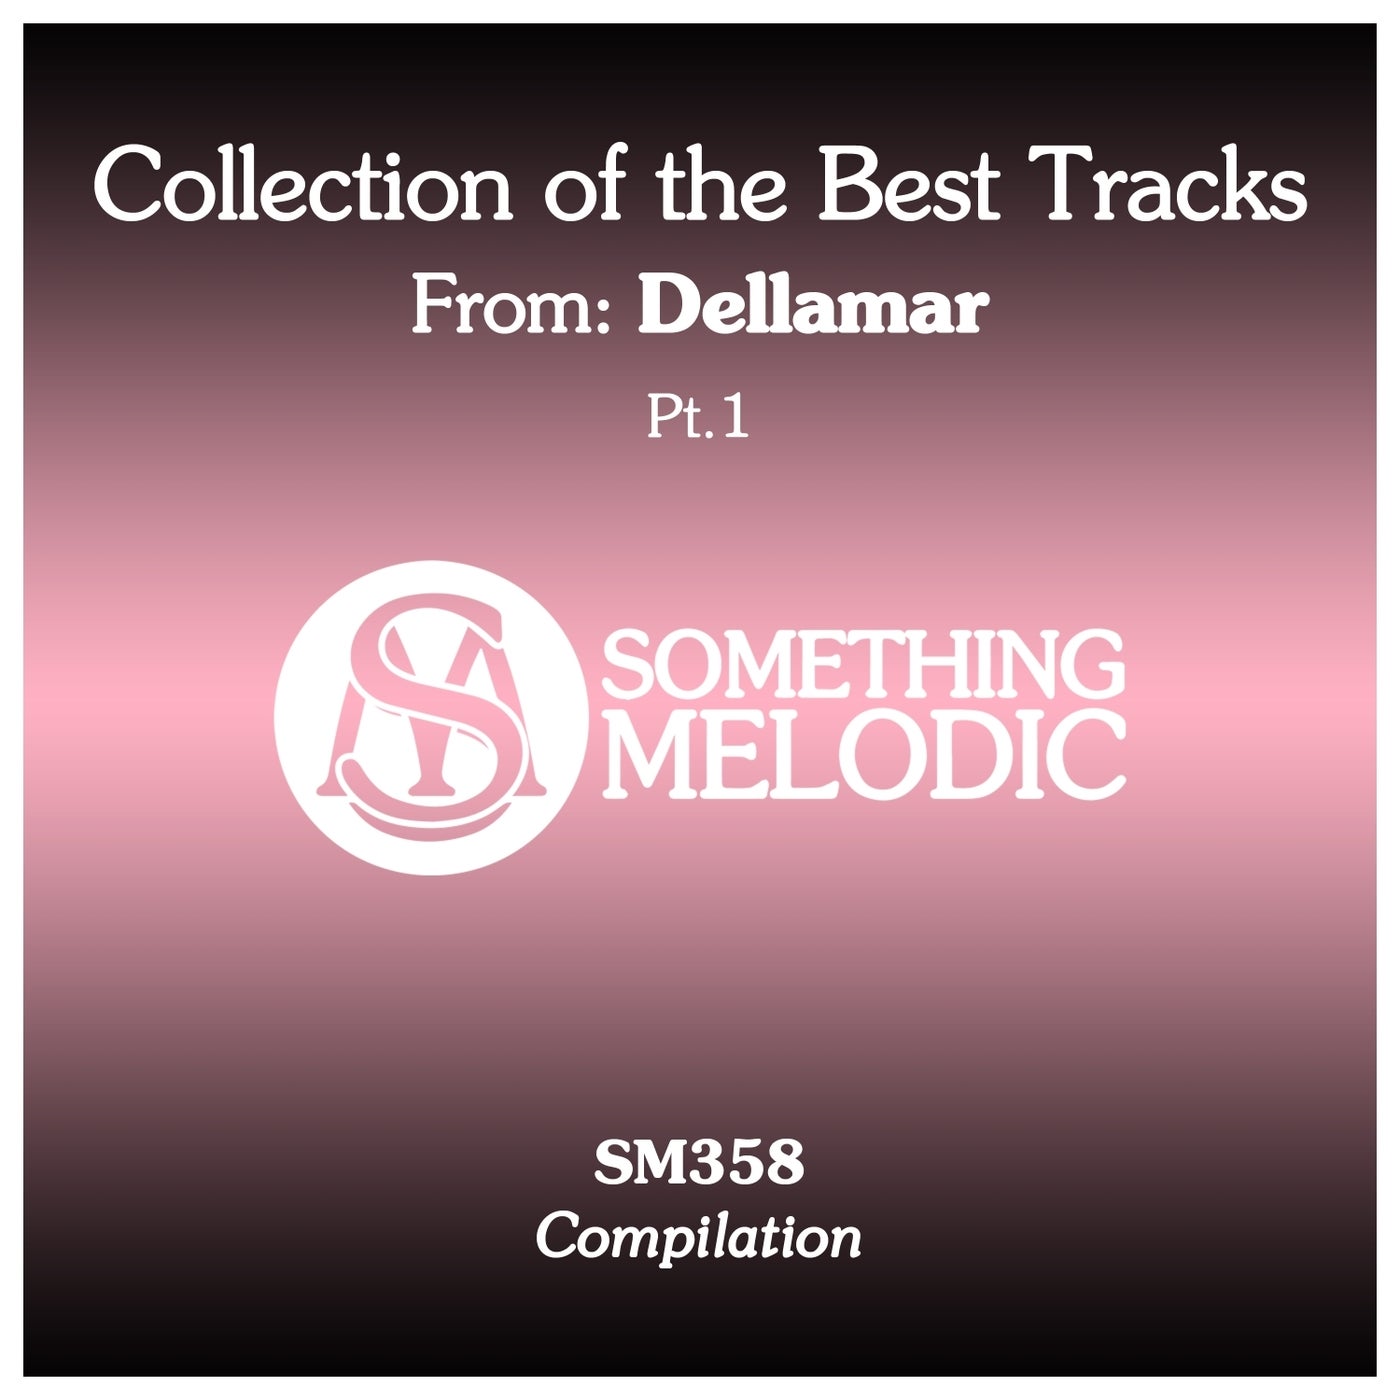 Collection of the Best Tracks From: Dellamar, Pt. 1